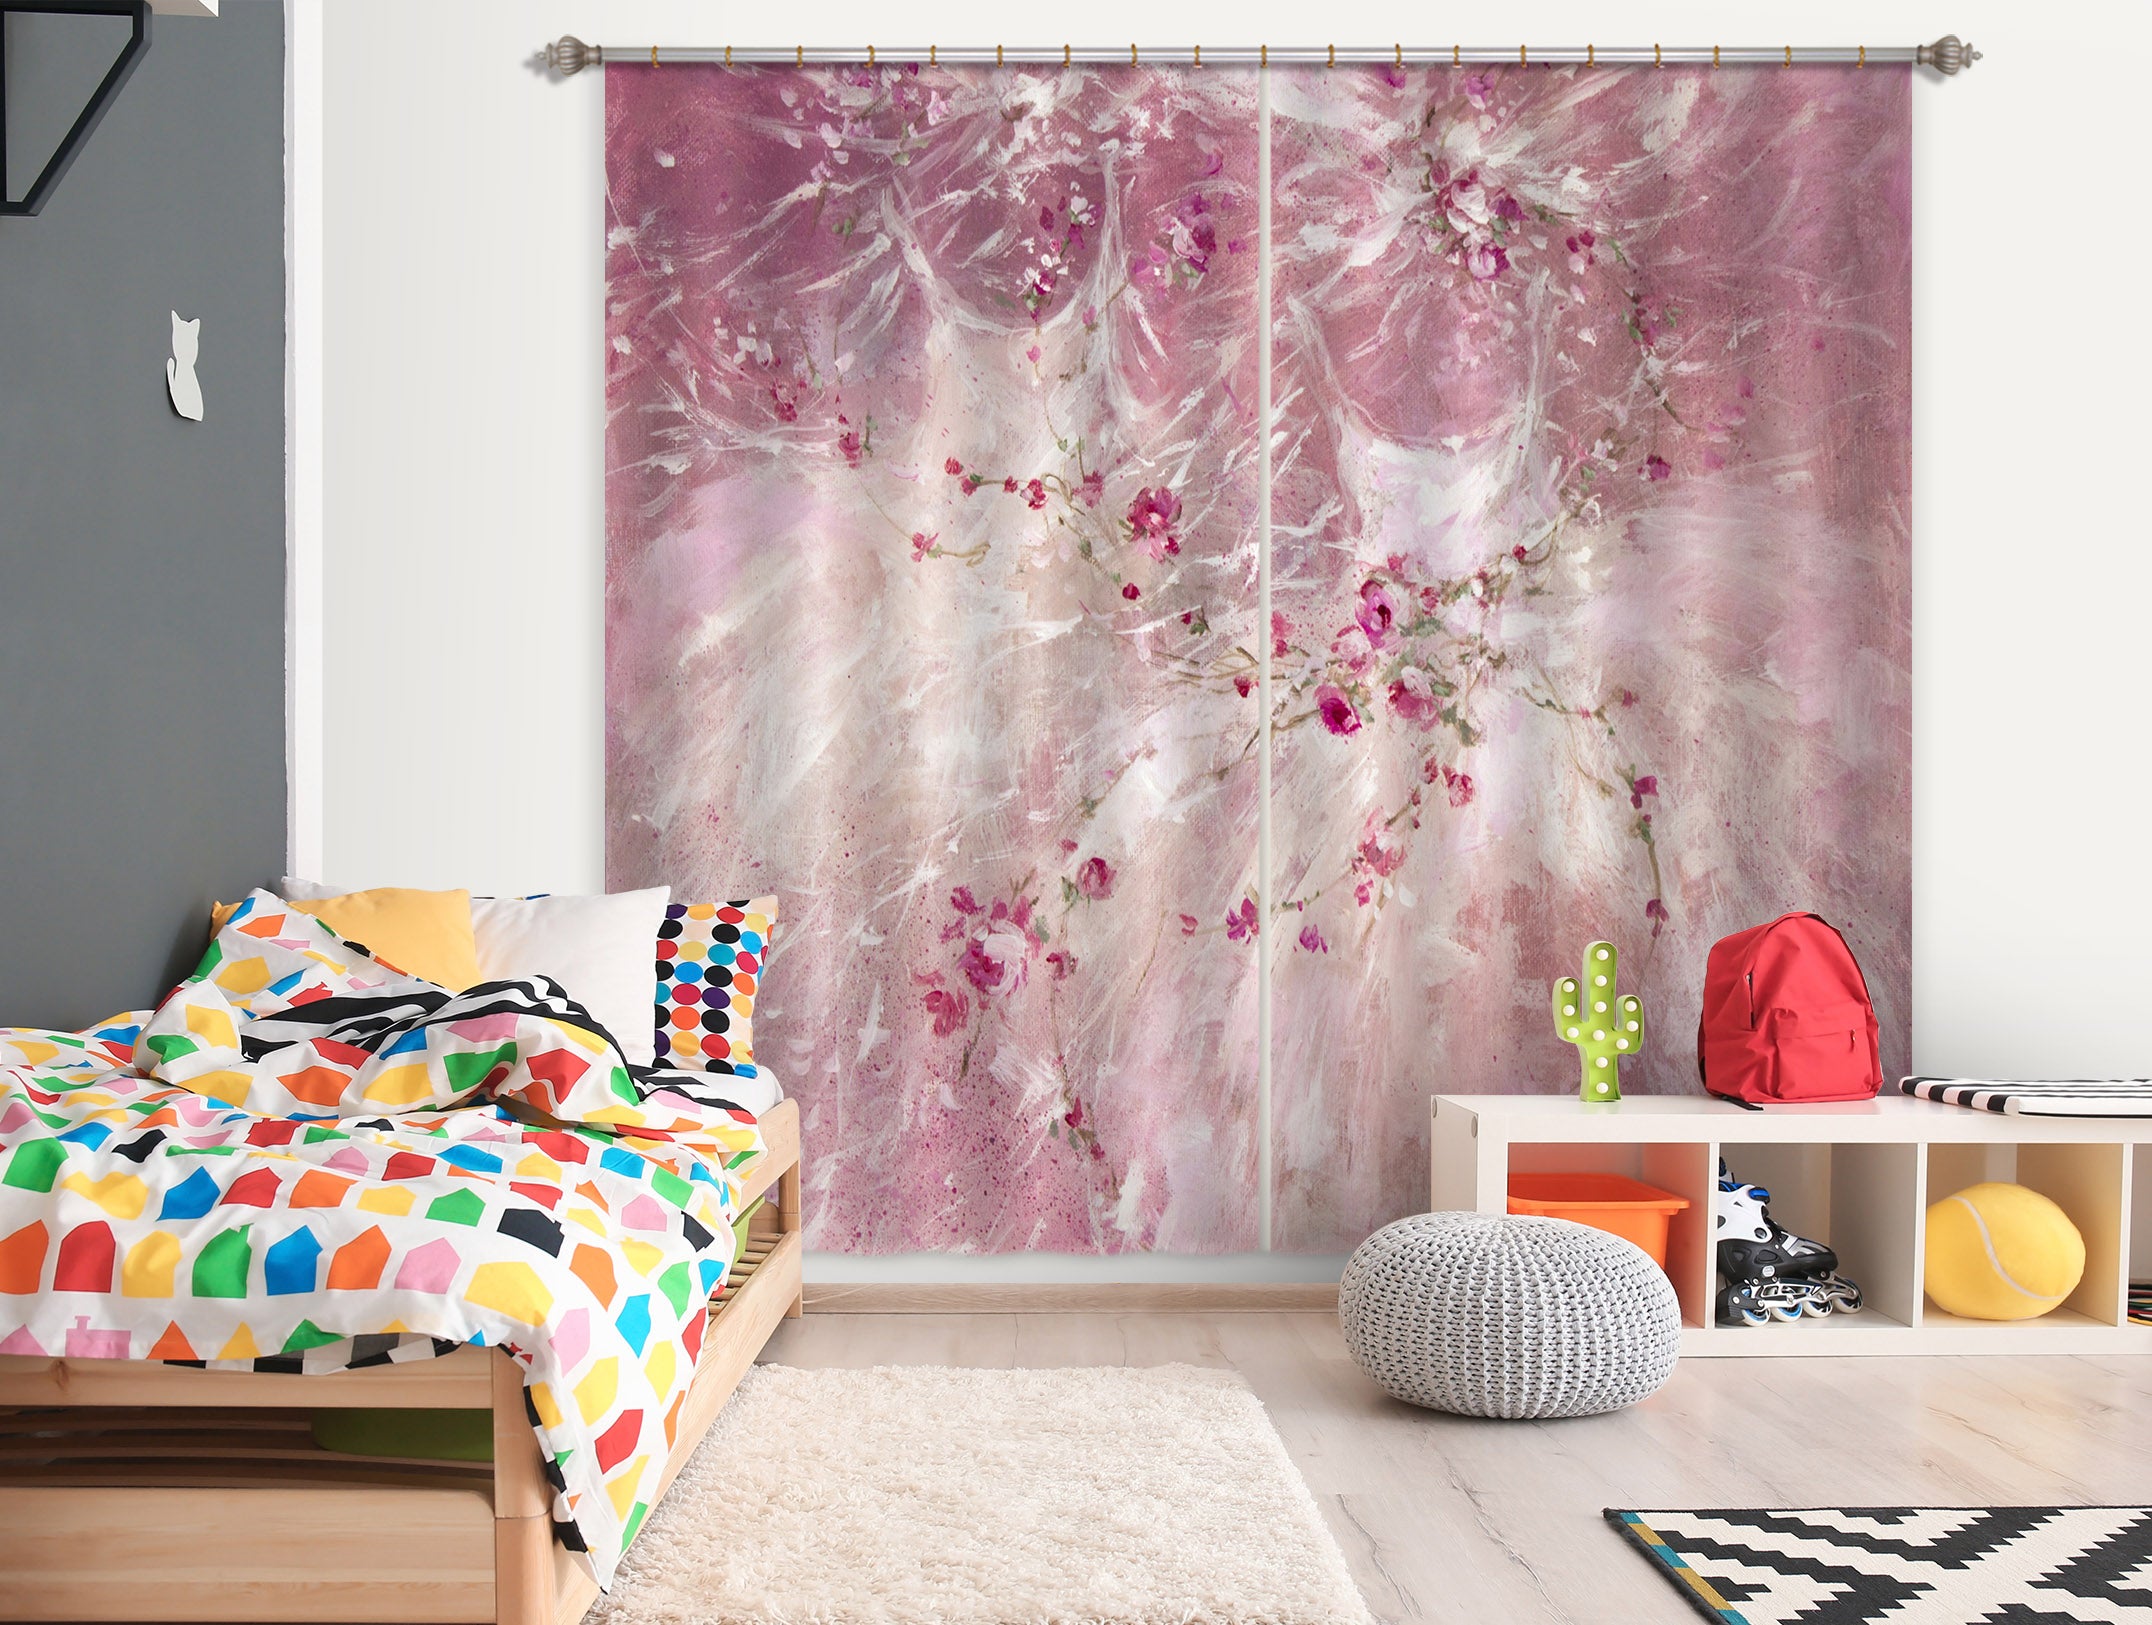 3D Red Plum 059 Debi Coules Curtain Curtains Drapes